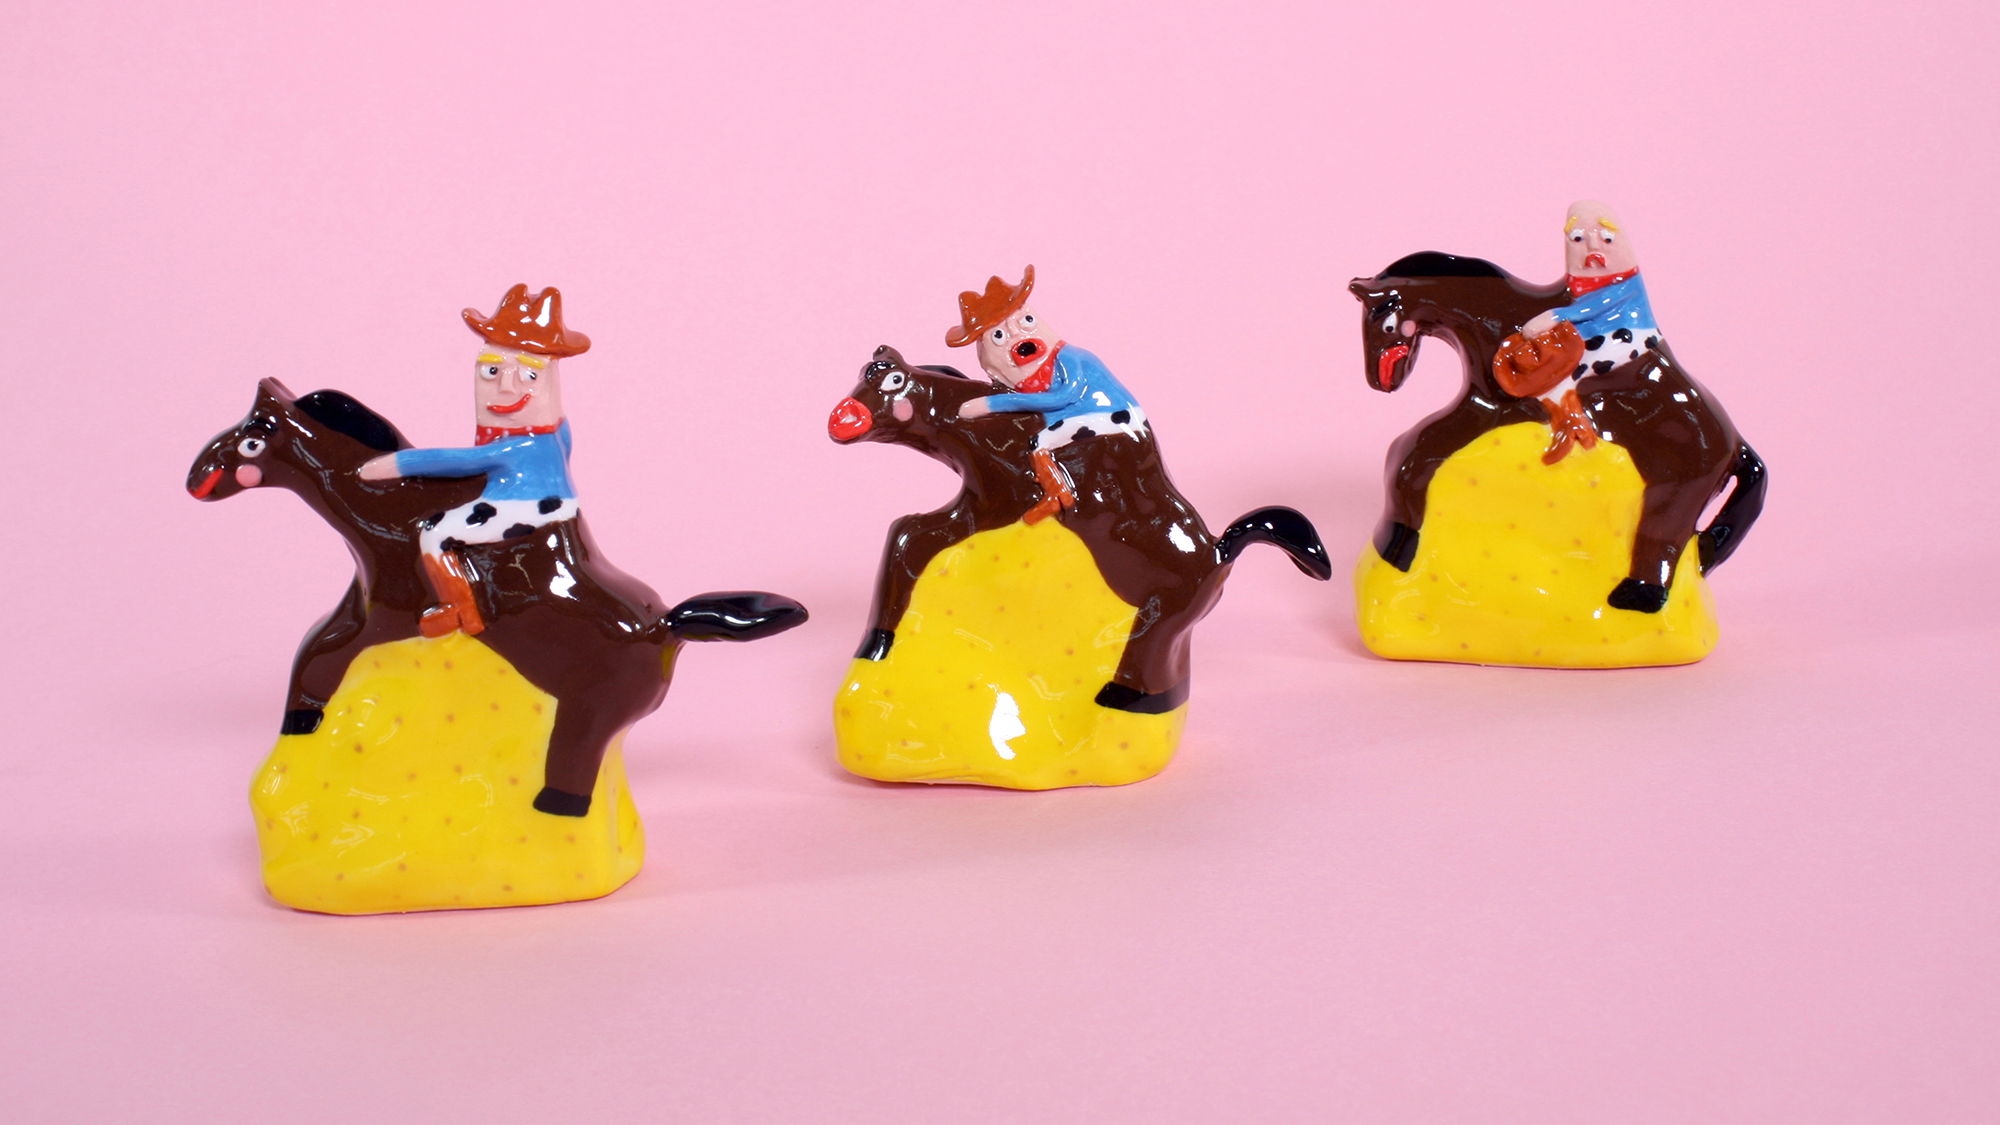 Colourful ceramic cowboys on horses by Naomi Anderson-Subryan.